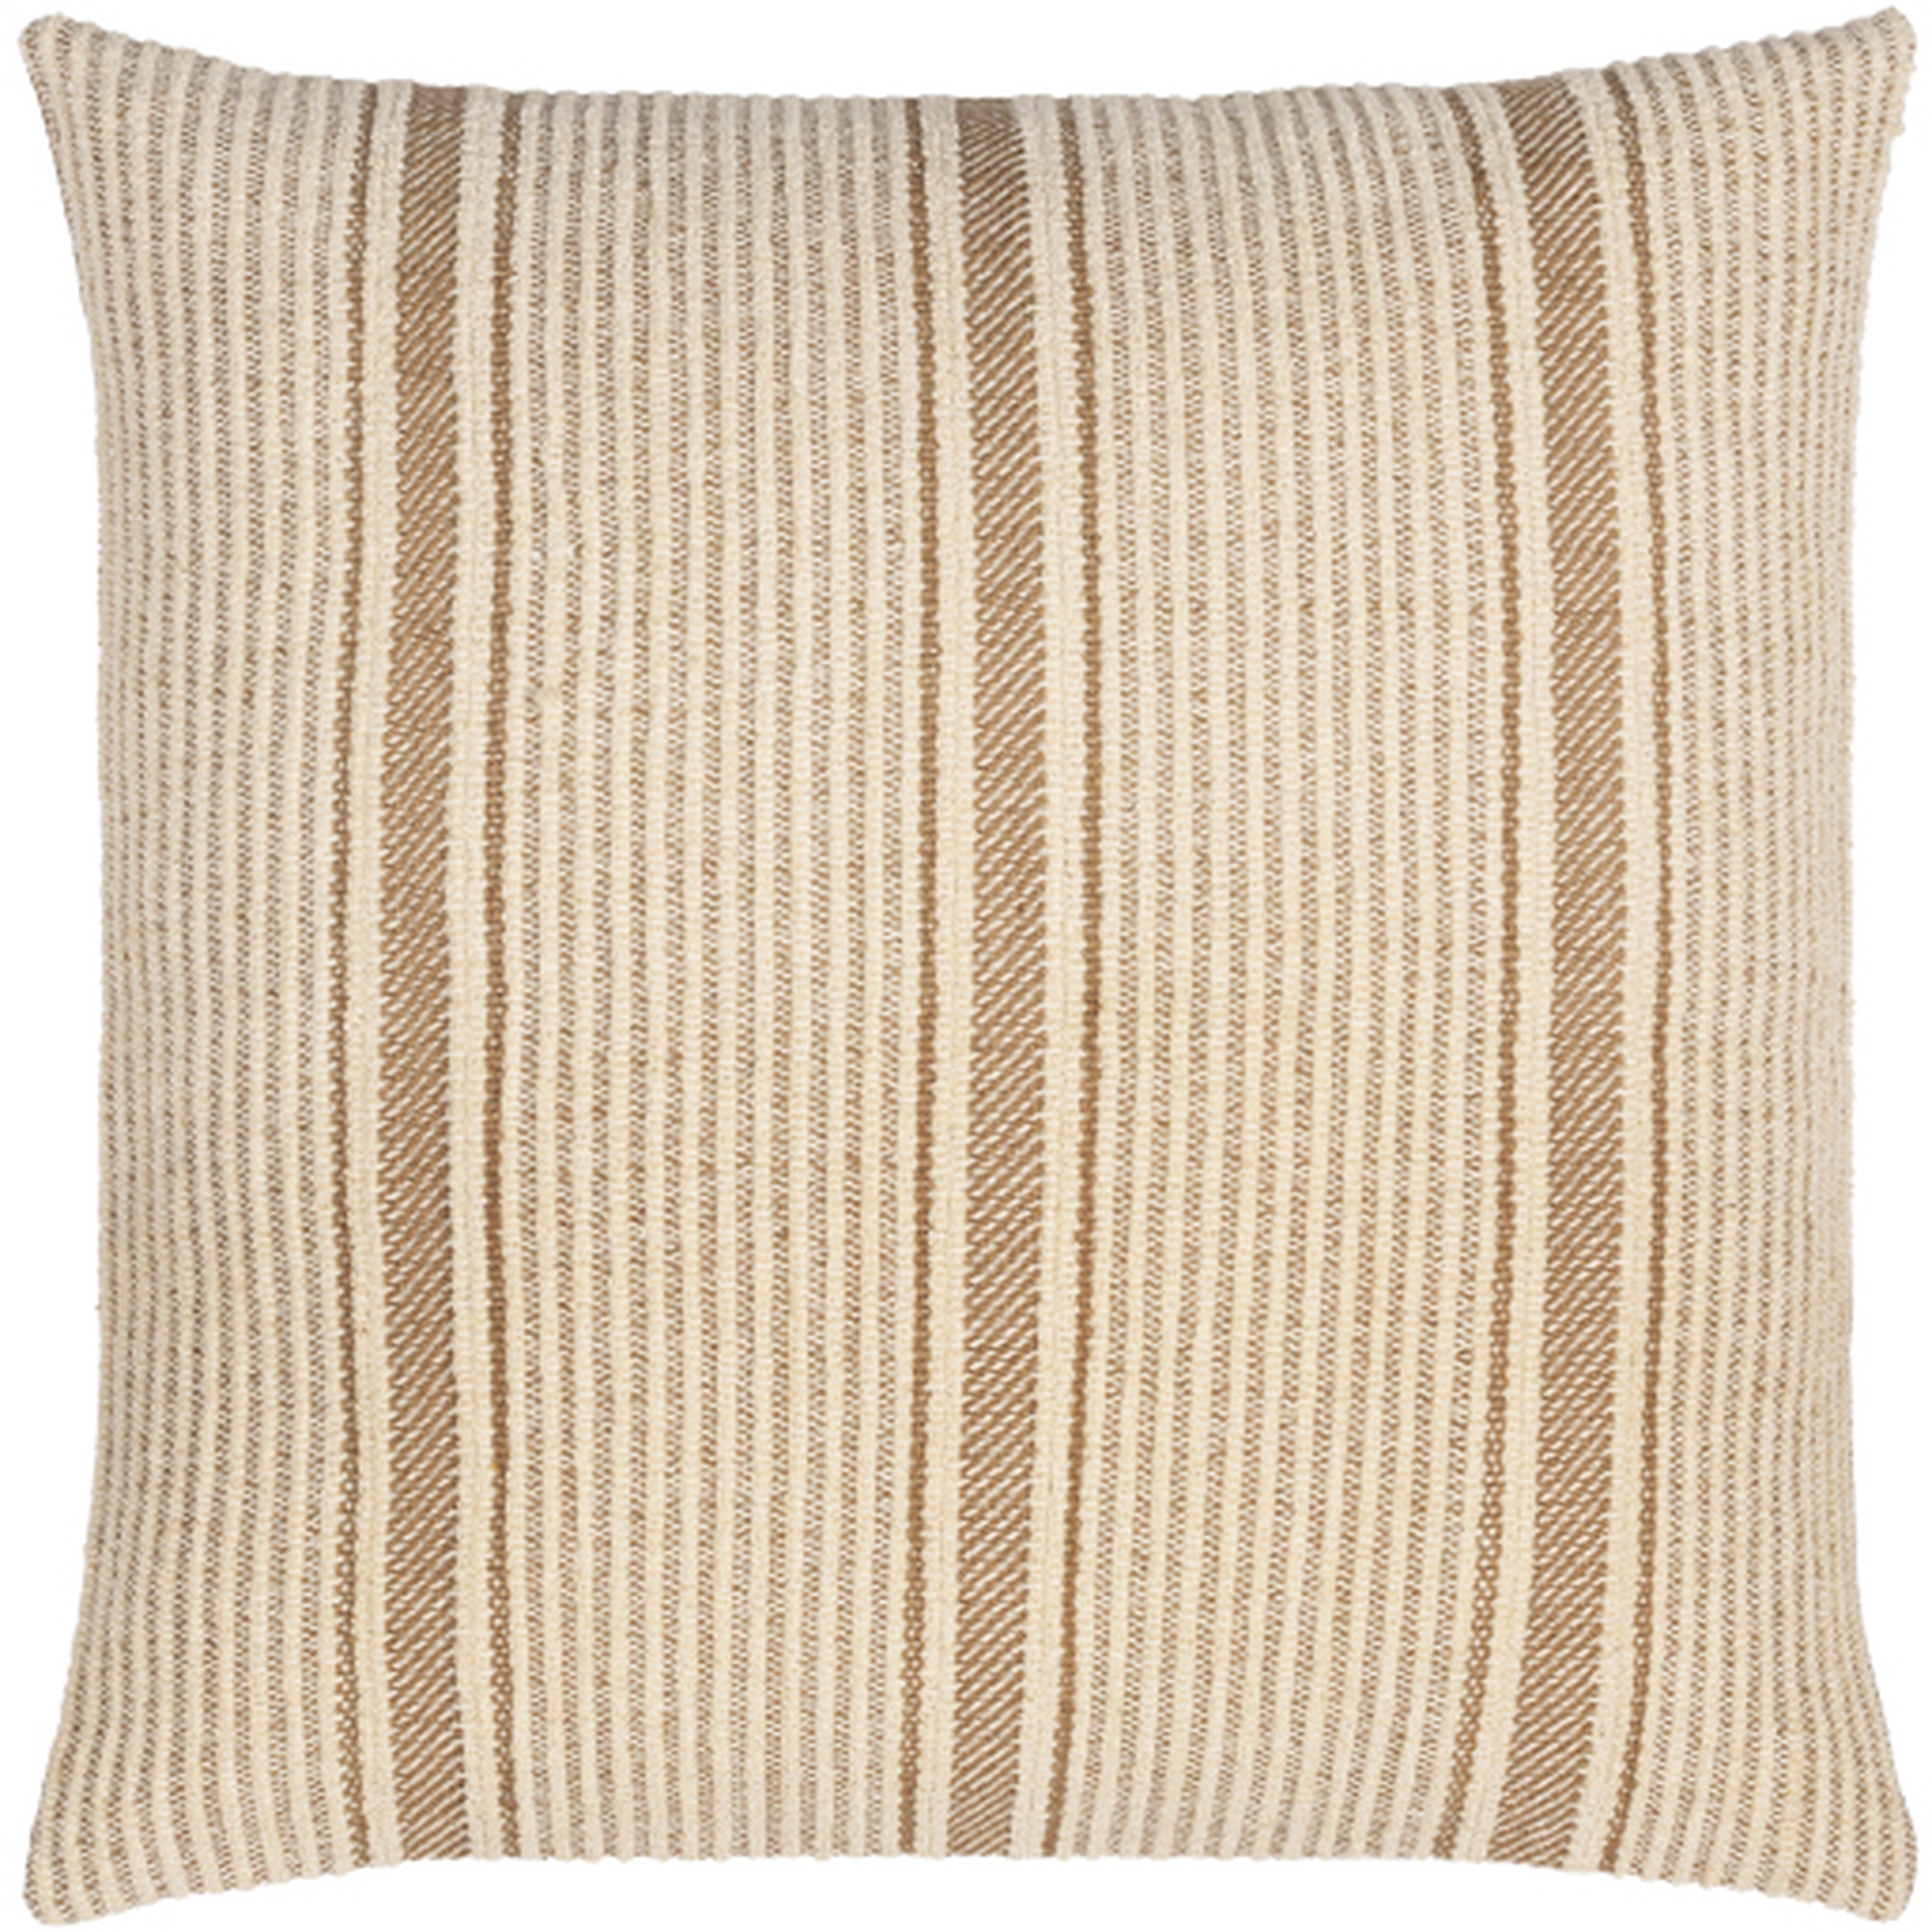 Camden Throw Pillow, 18" x 18", with poly insert - Surya